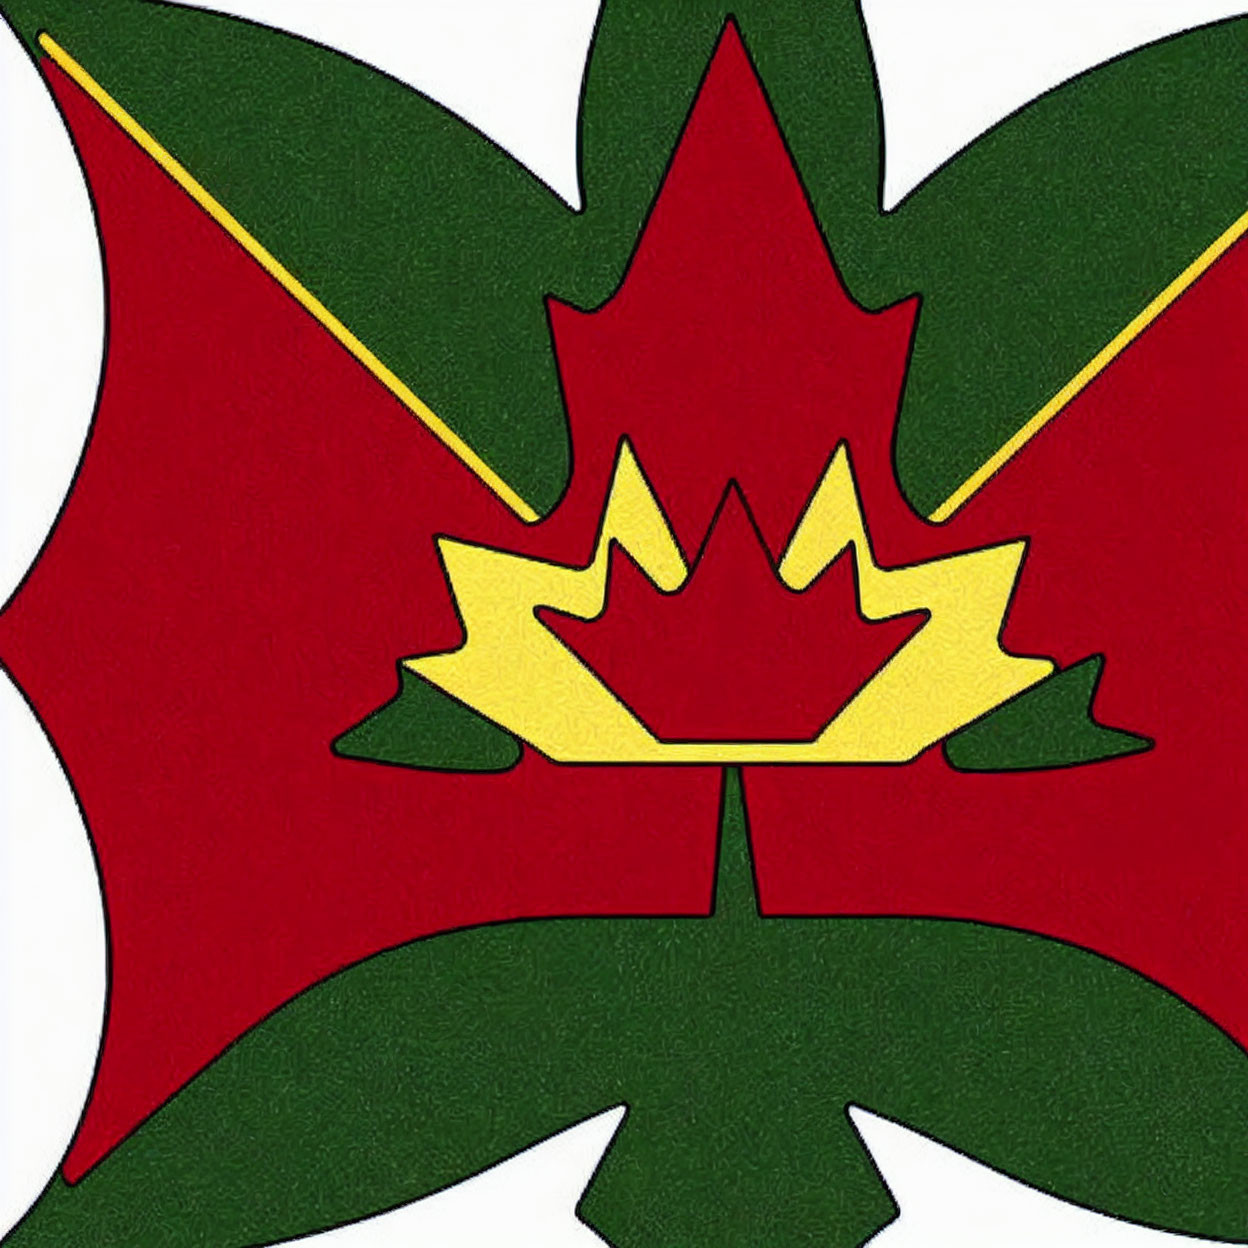 Stylized red and gold maple leaf graphic on green leaf against white background